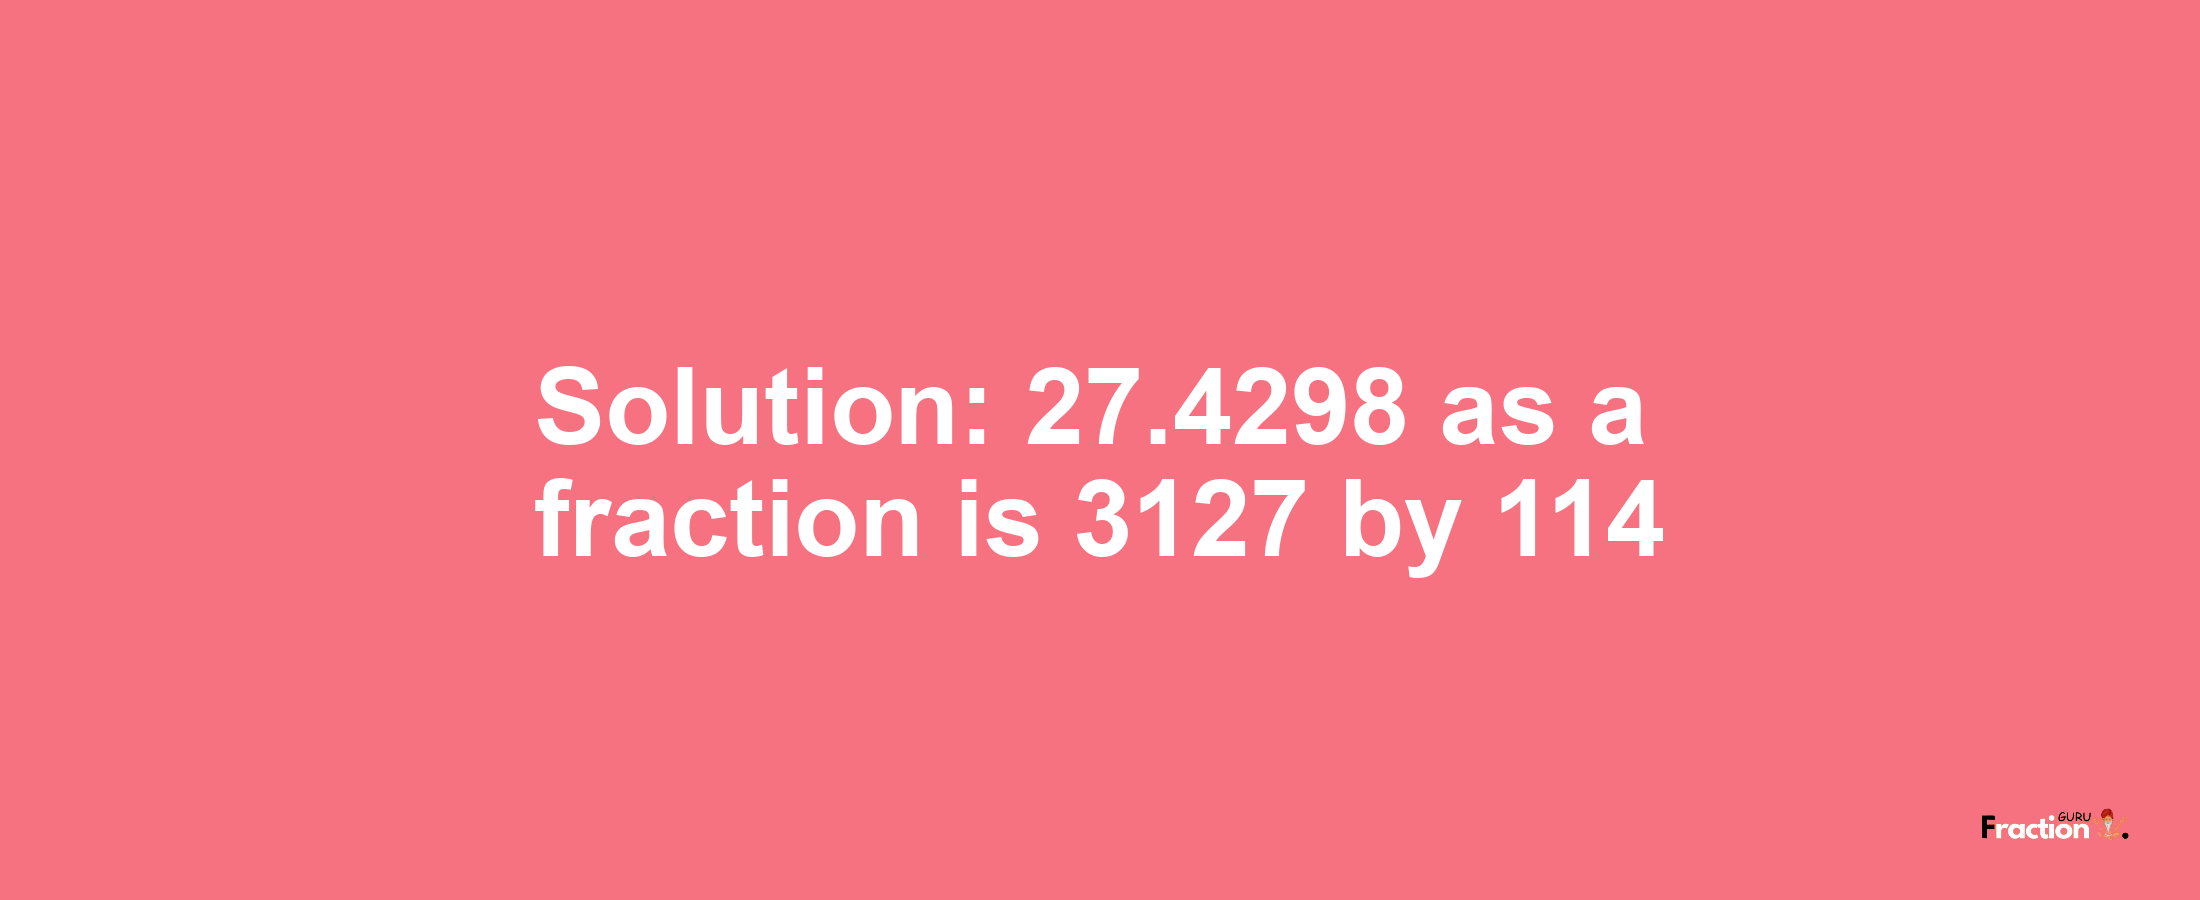 Solution:27.4298 as a fraction is 3127/114